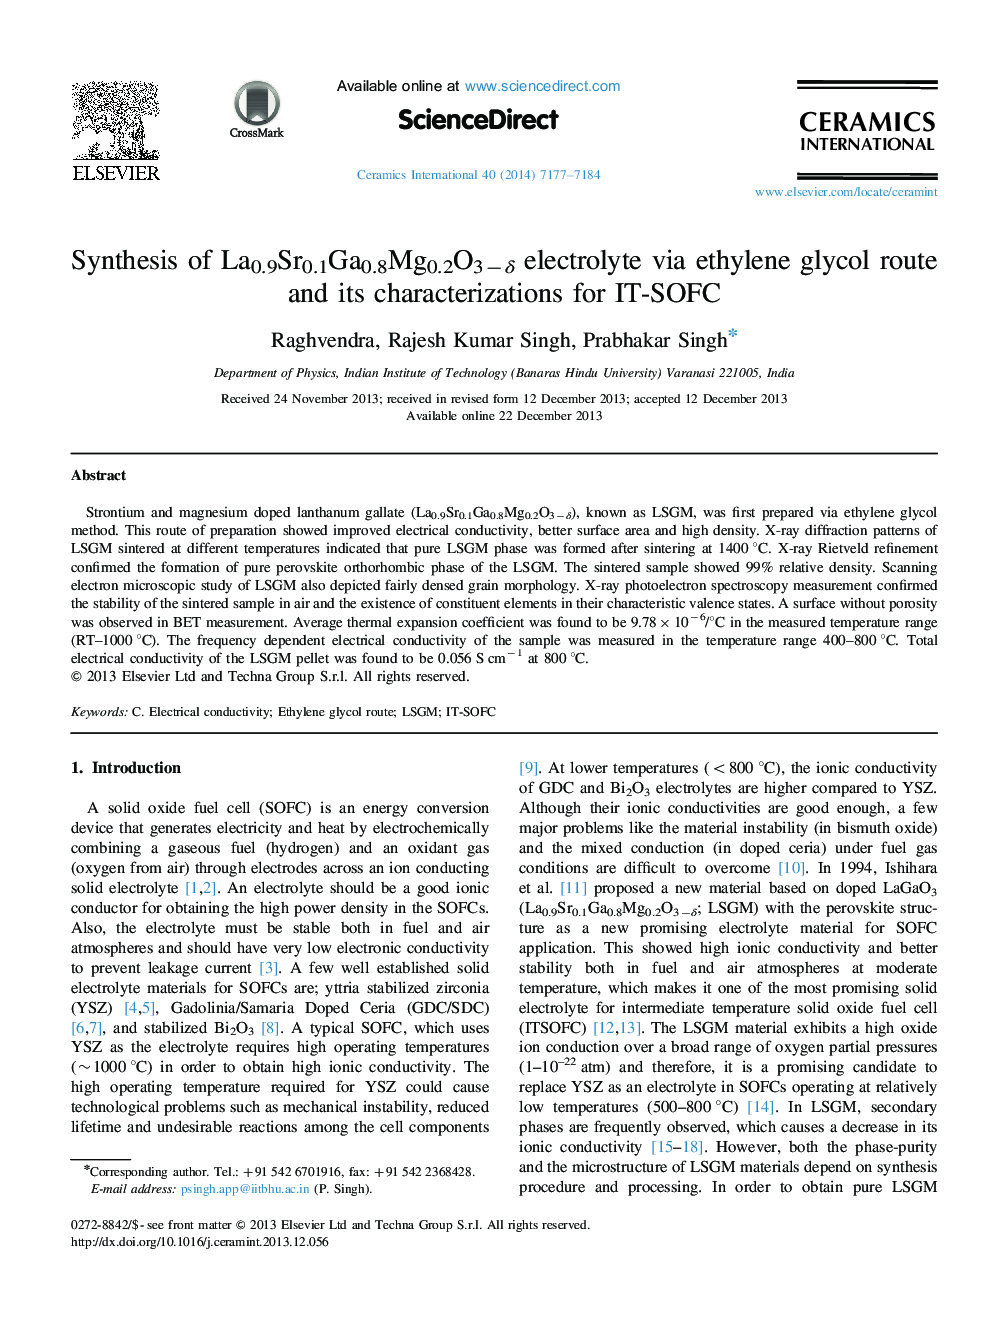 Synthesis of La0.9Sr0.1Ga0.8Mg0.2O3−δ electrolyte via ethylene glycol route and its characterizations for IT-SOFC